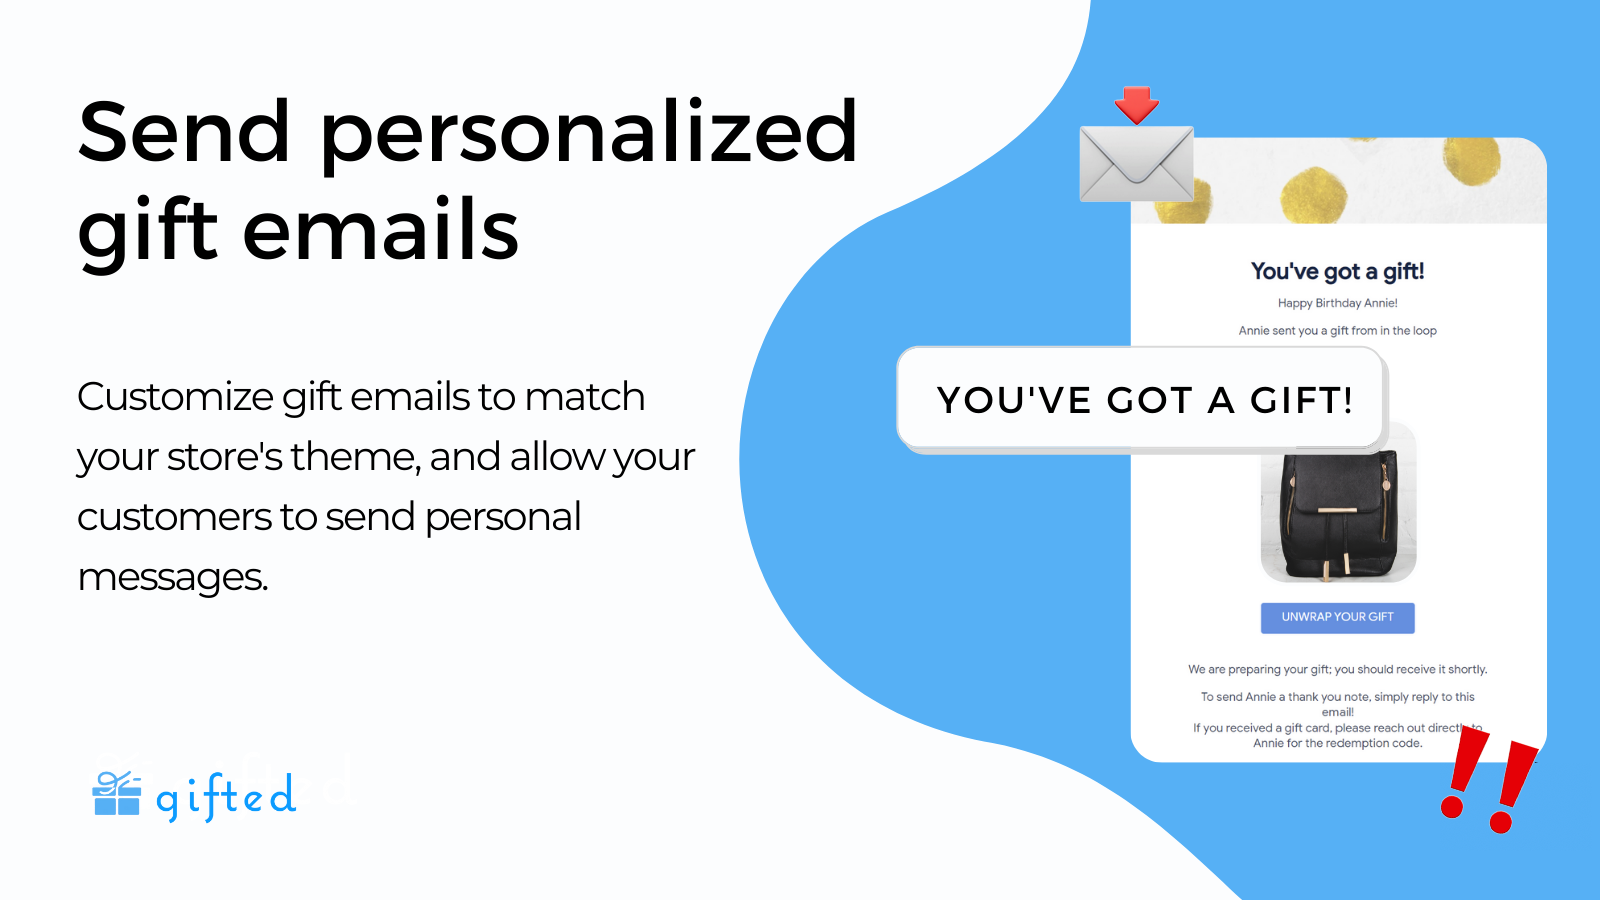 Send personalized gift emails